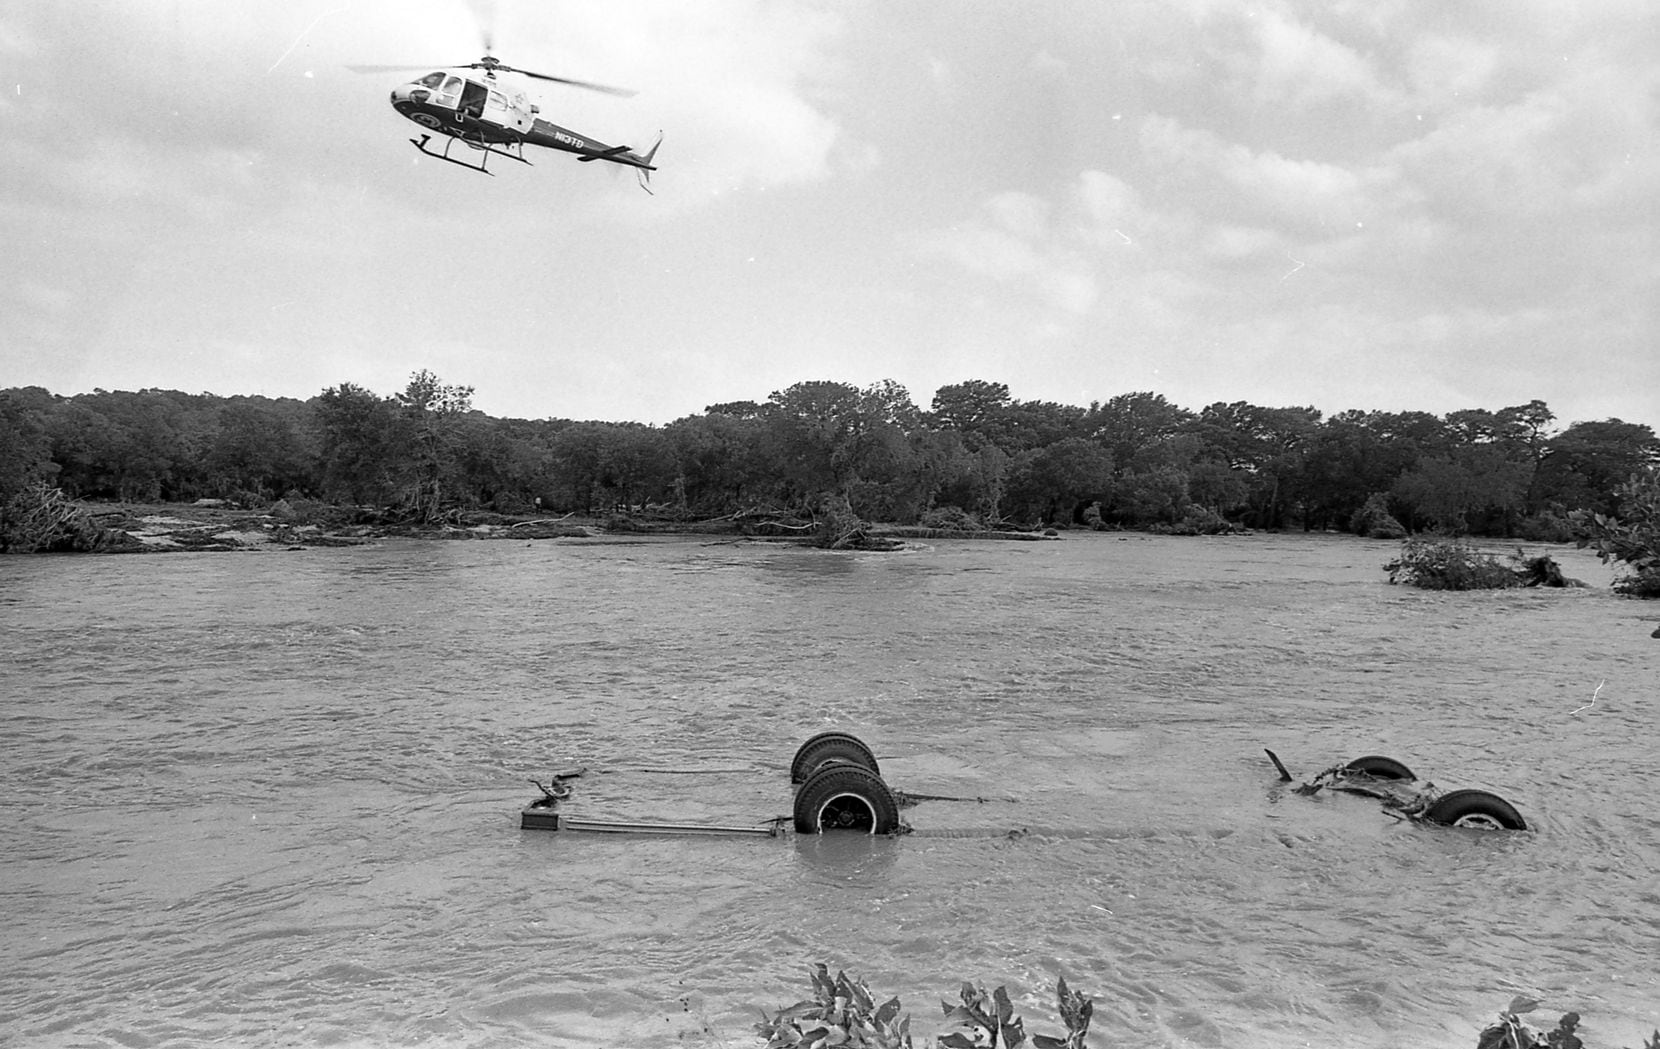 A helicopter hovers over the Seagoville Road Baptist Church bus swept away by floodwater on July 17, 1987.